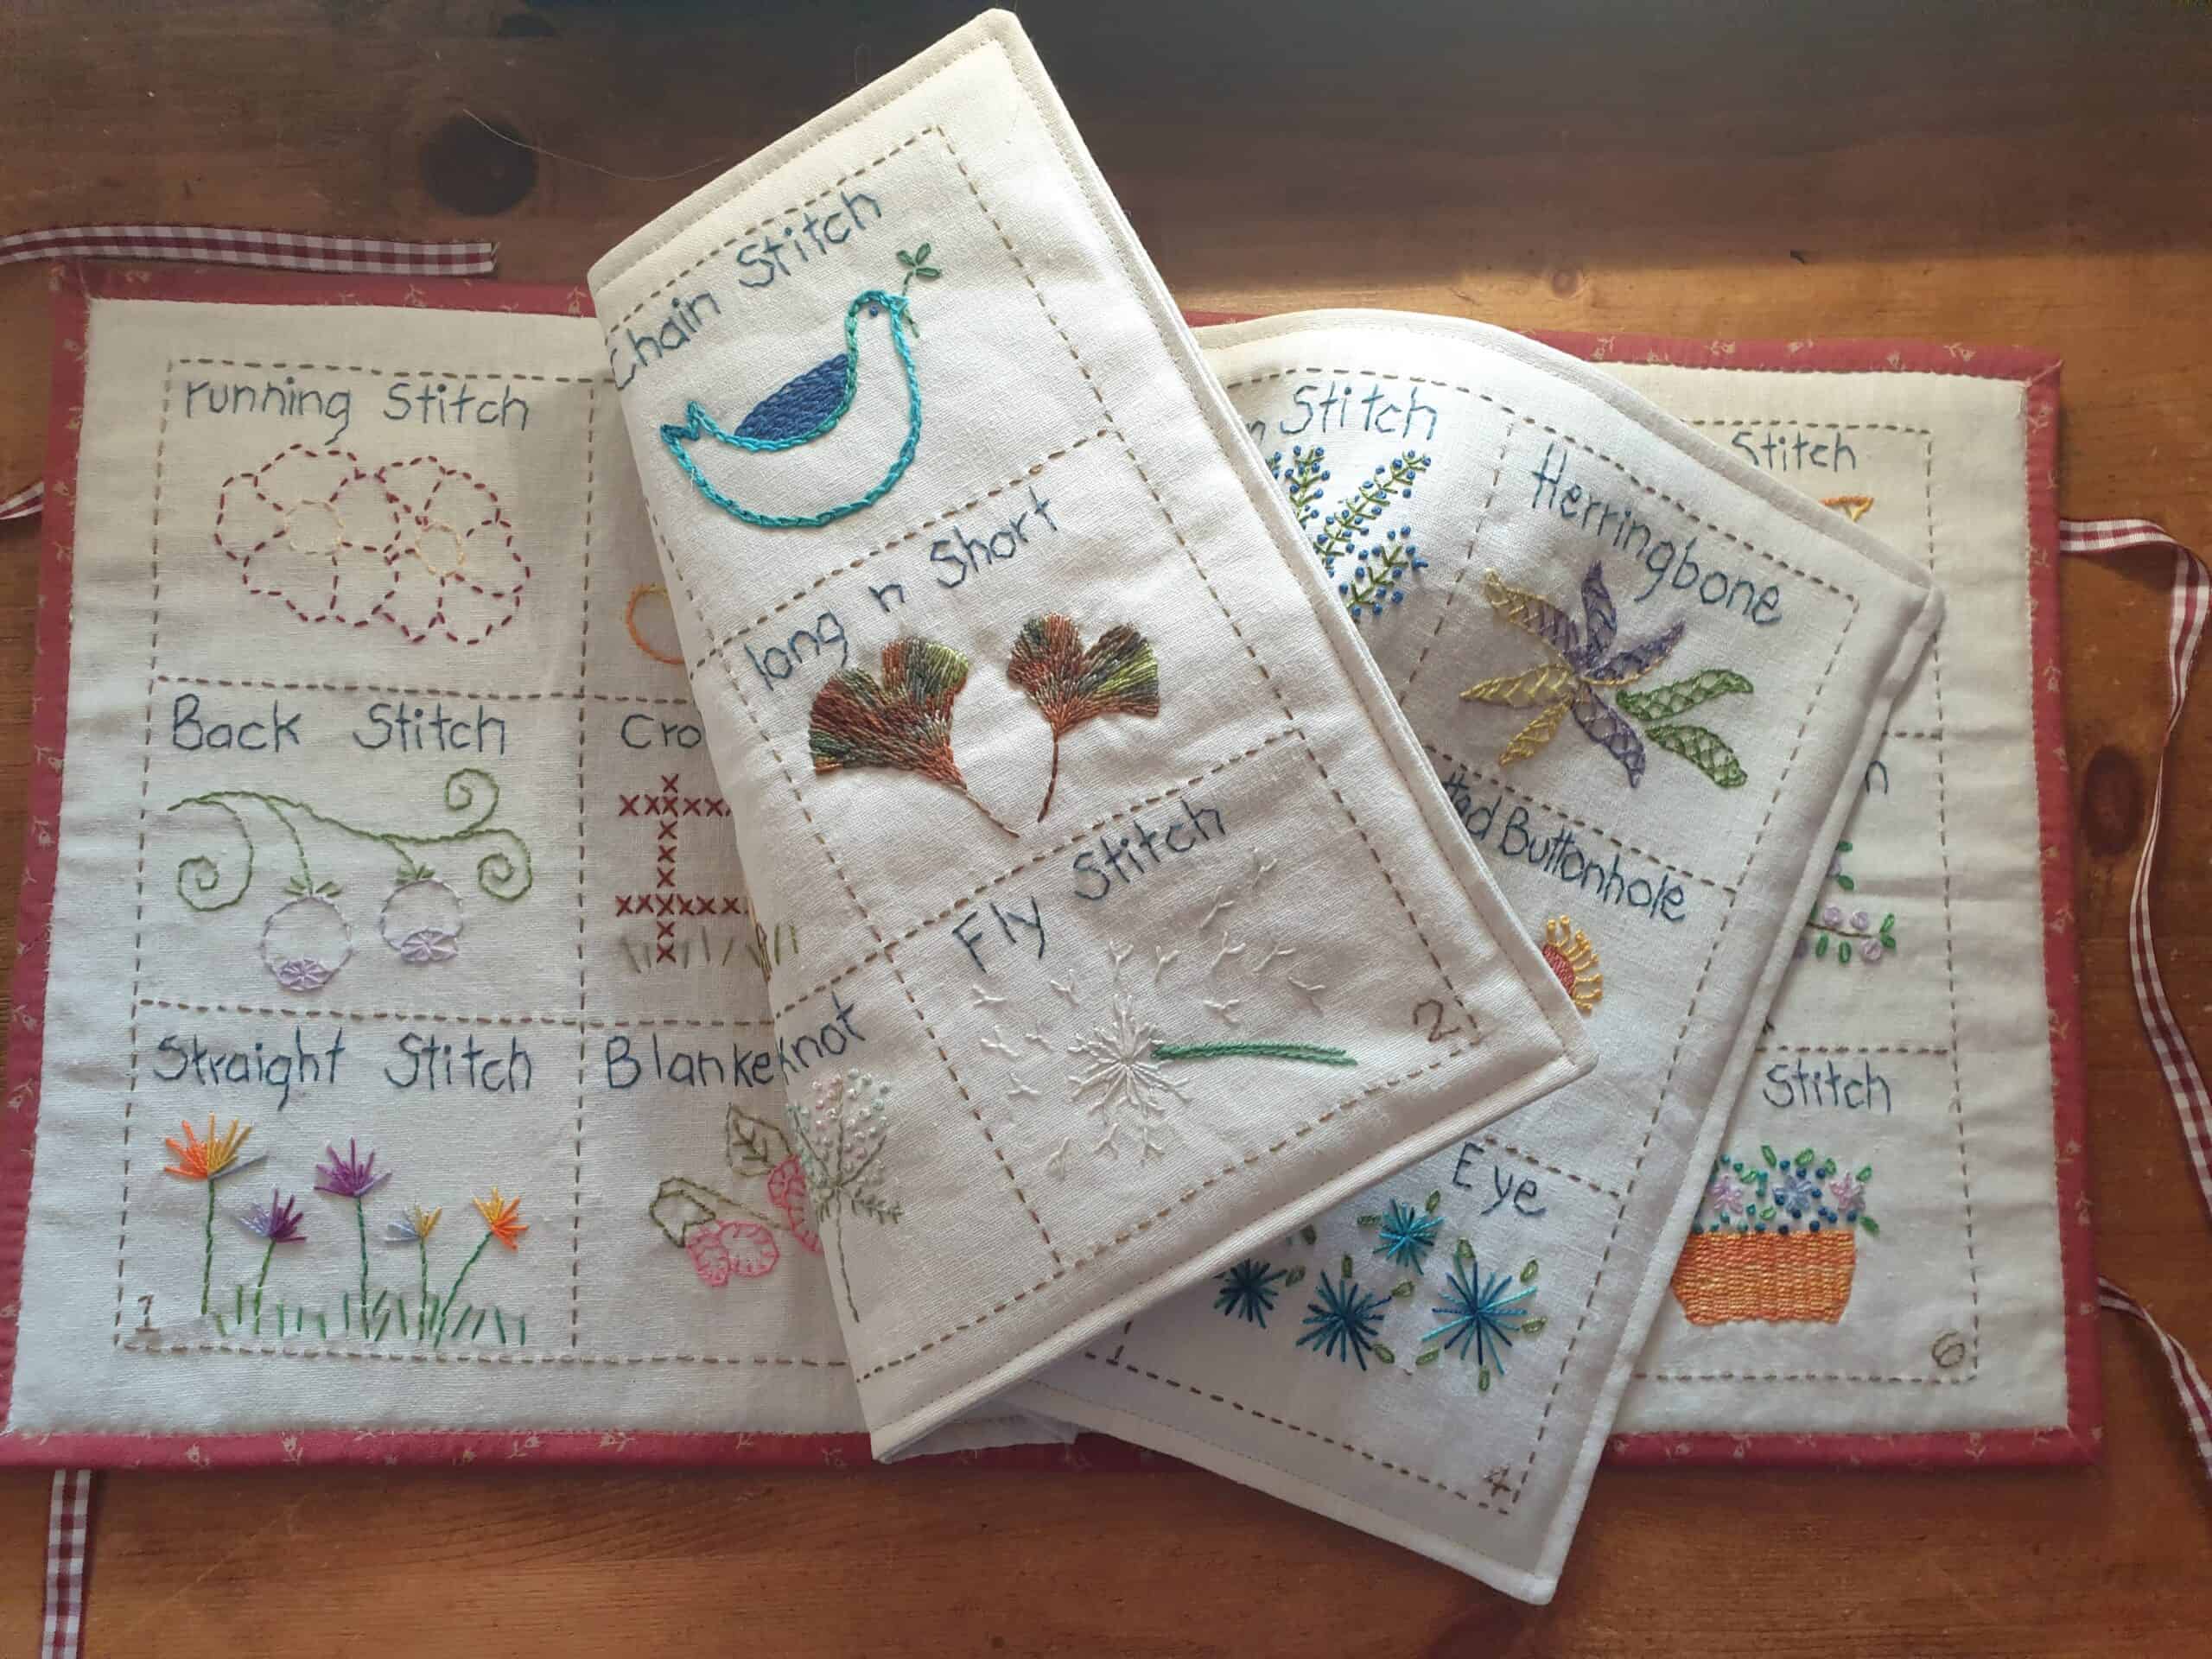 HAND EMBROIDERY STITCHES AT-A-GLANCE BOOKLET: Country Sampler - Spring  Green, WI